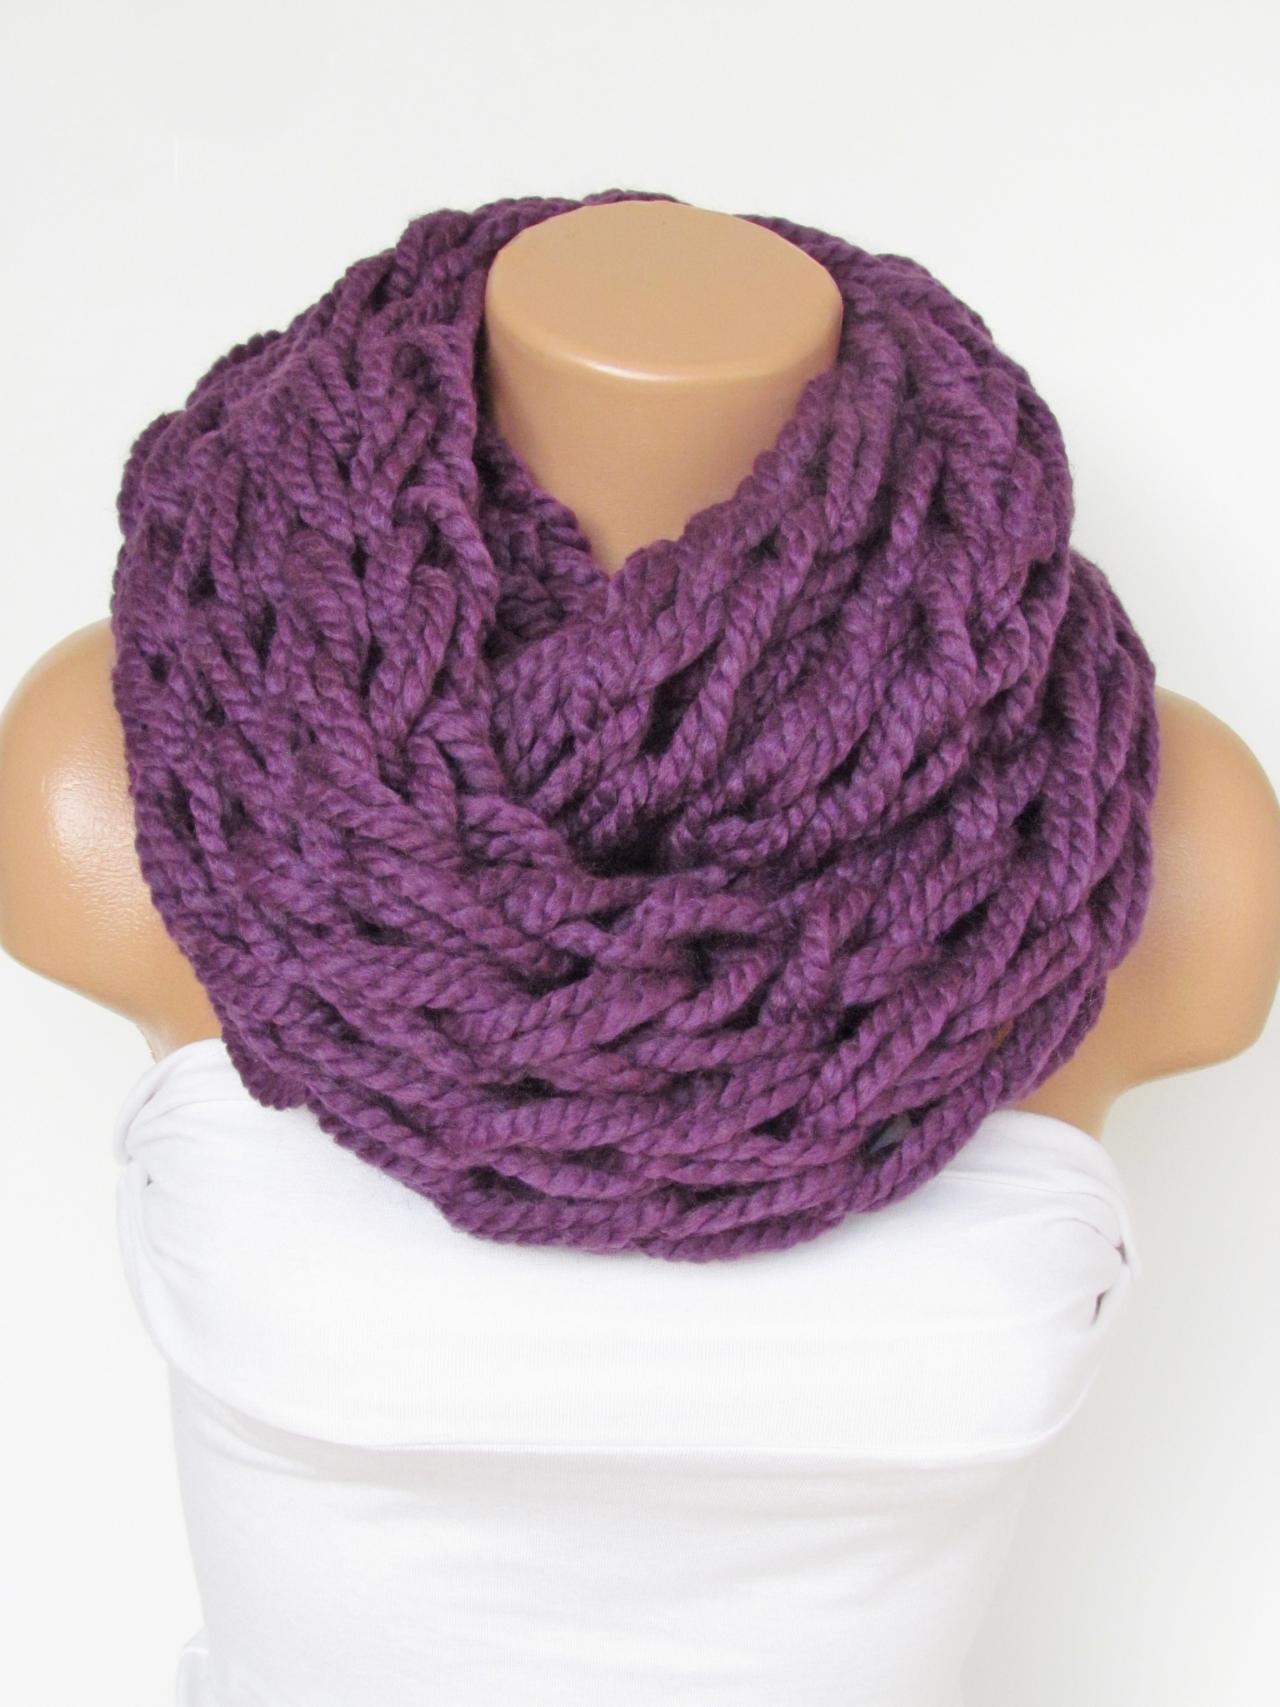 Infinity Purple Scarf,Neckwarmer,Knitted Scarf,Circle Loop Scarf, Winter Accessories, Fall Fashion,Chunky Scarf.Cowl Scarf